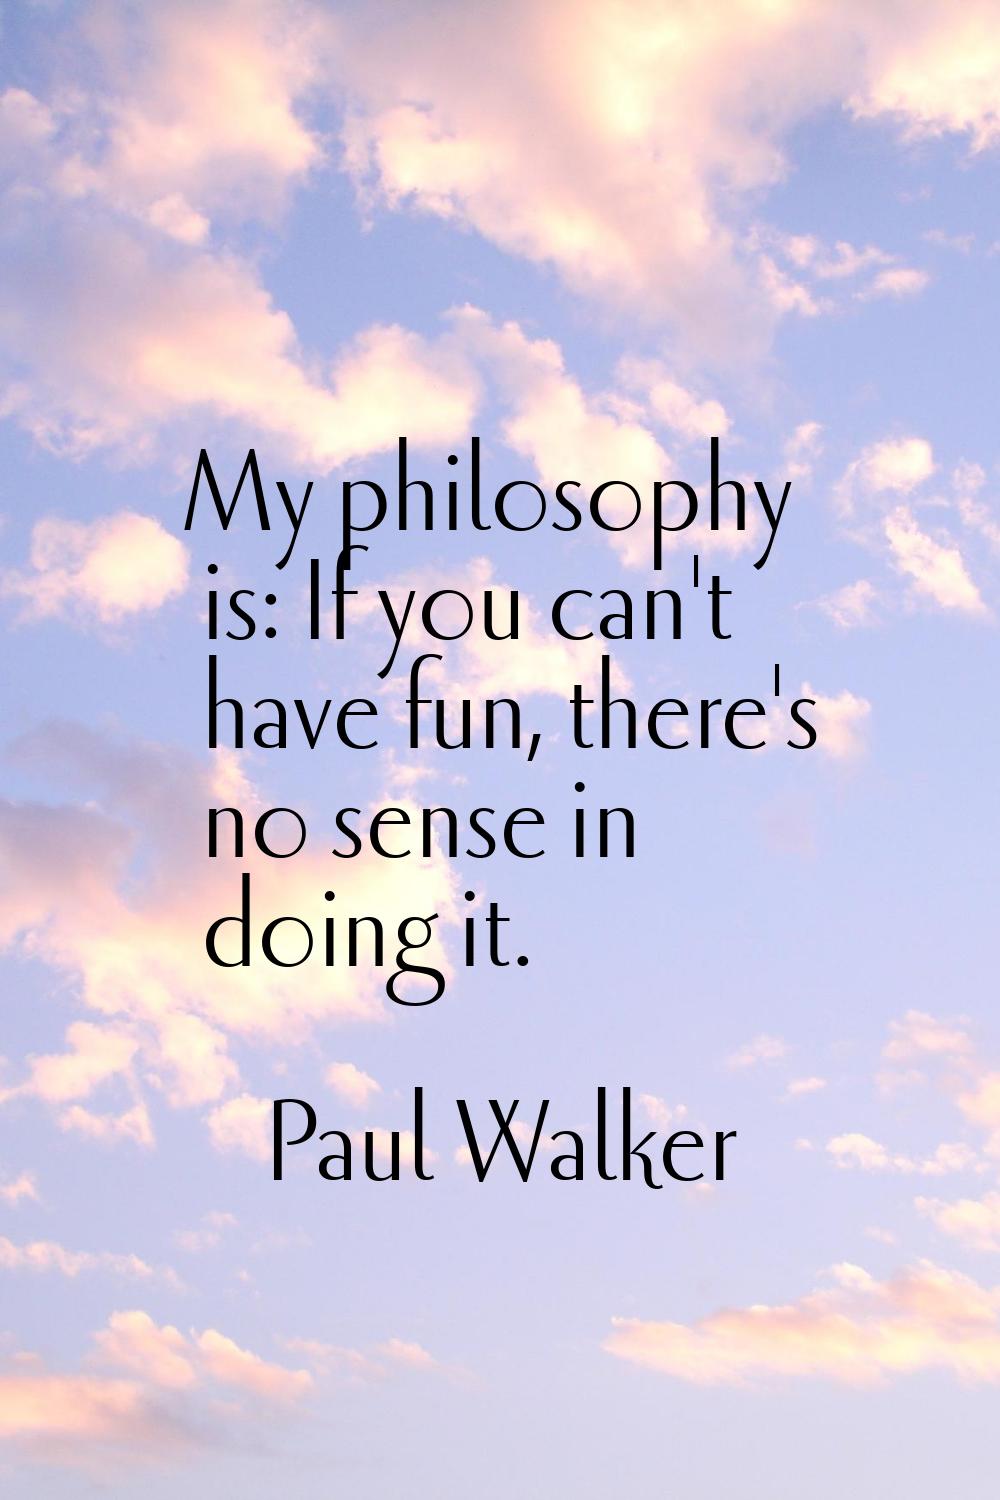 My philosophy is: If you can't have fun, there's no sense in doing it.